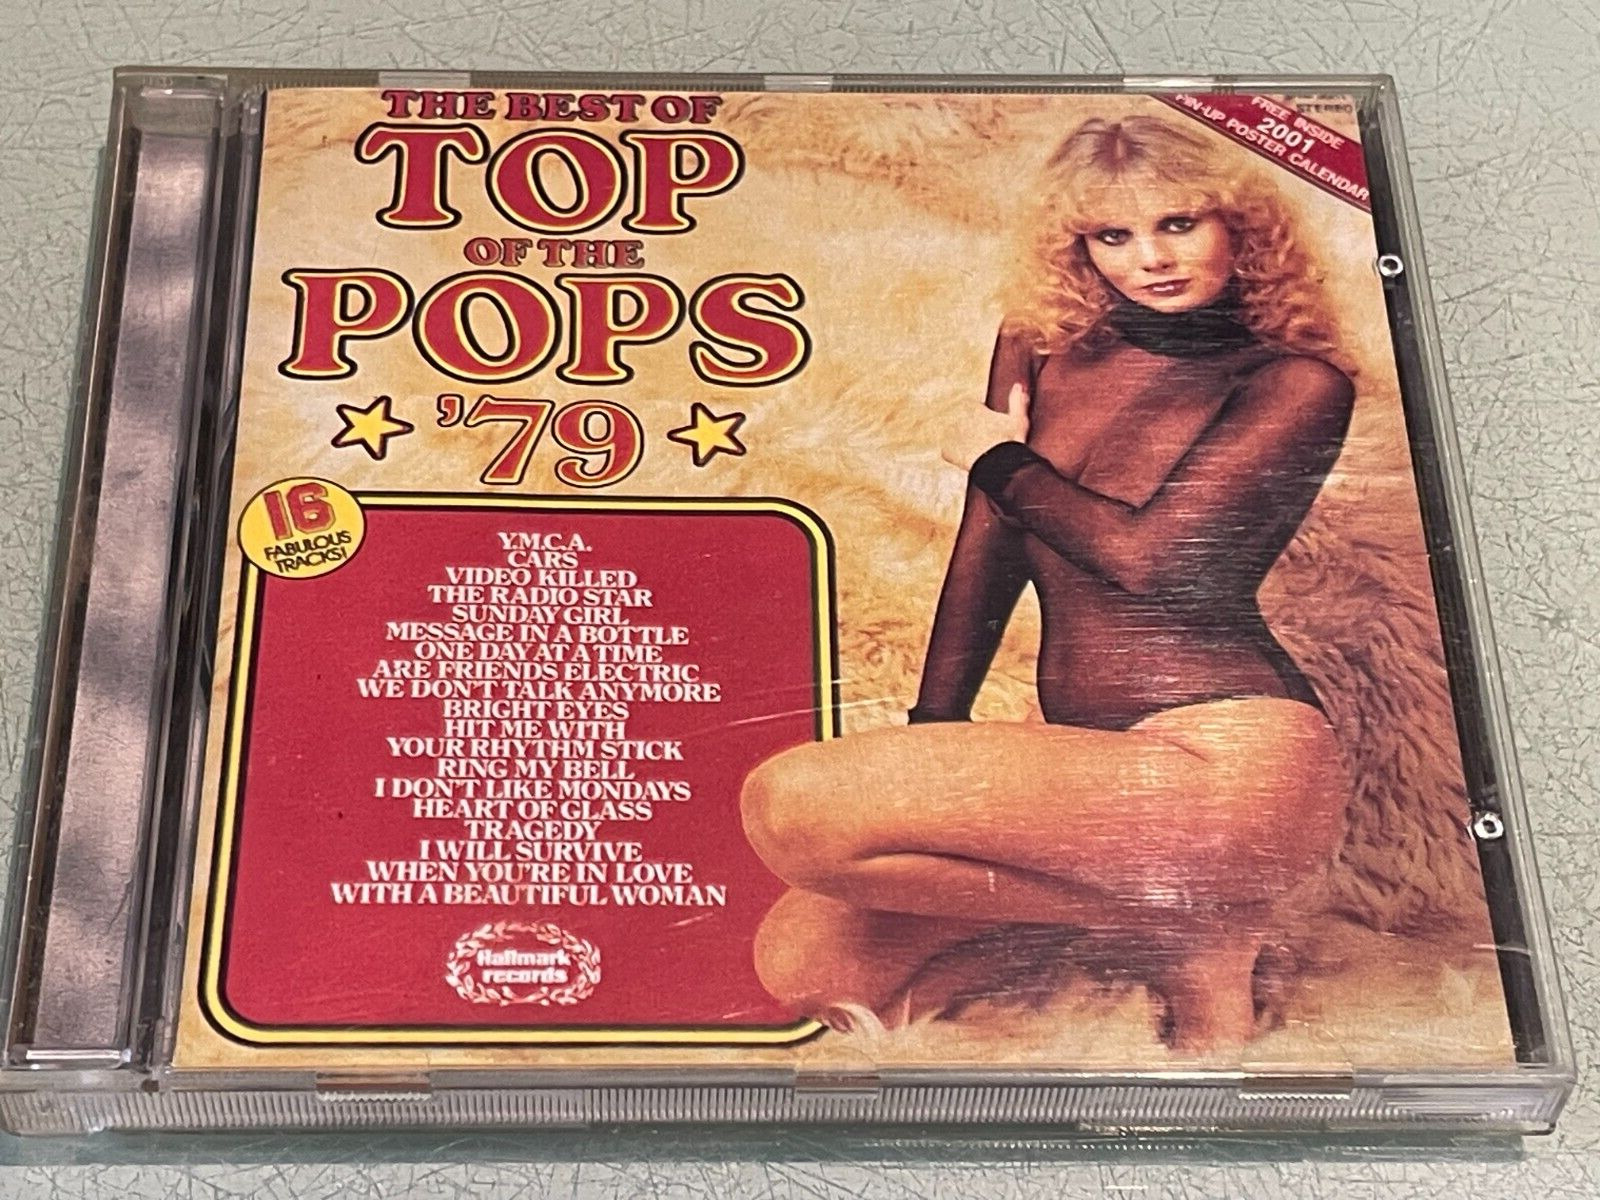 The Best of Top of The Pops '79 - CD Album - 2000 ABM with Pin-Up 2001 Calendar